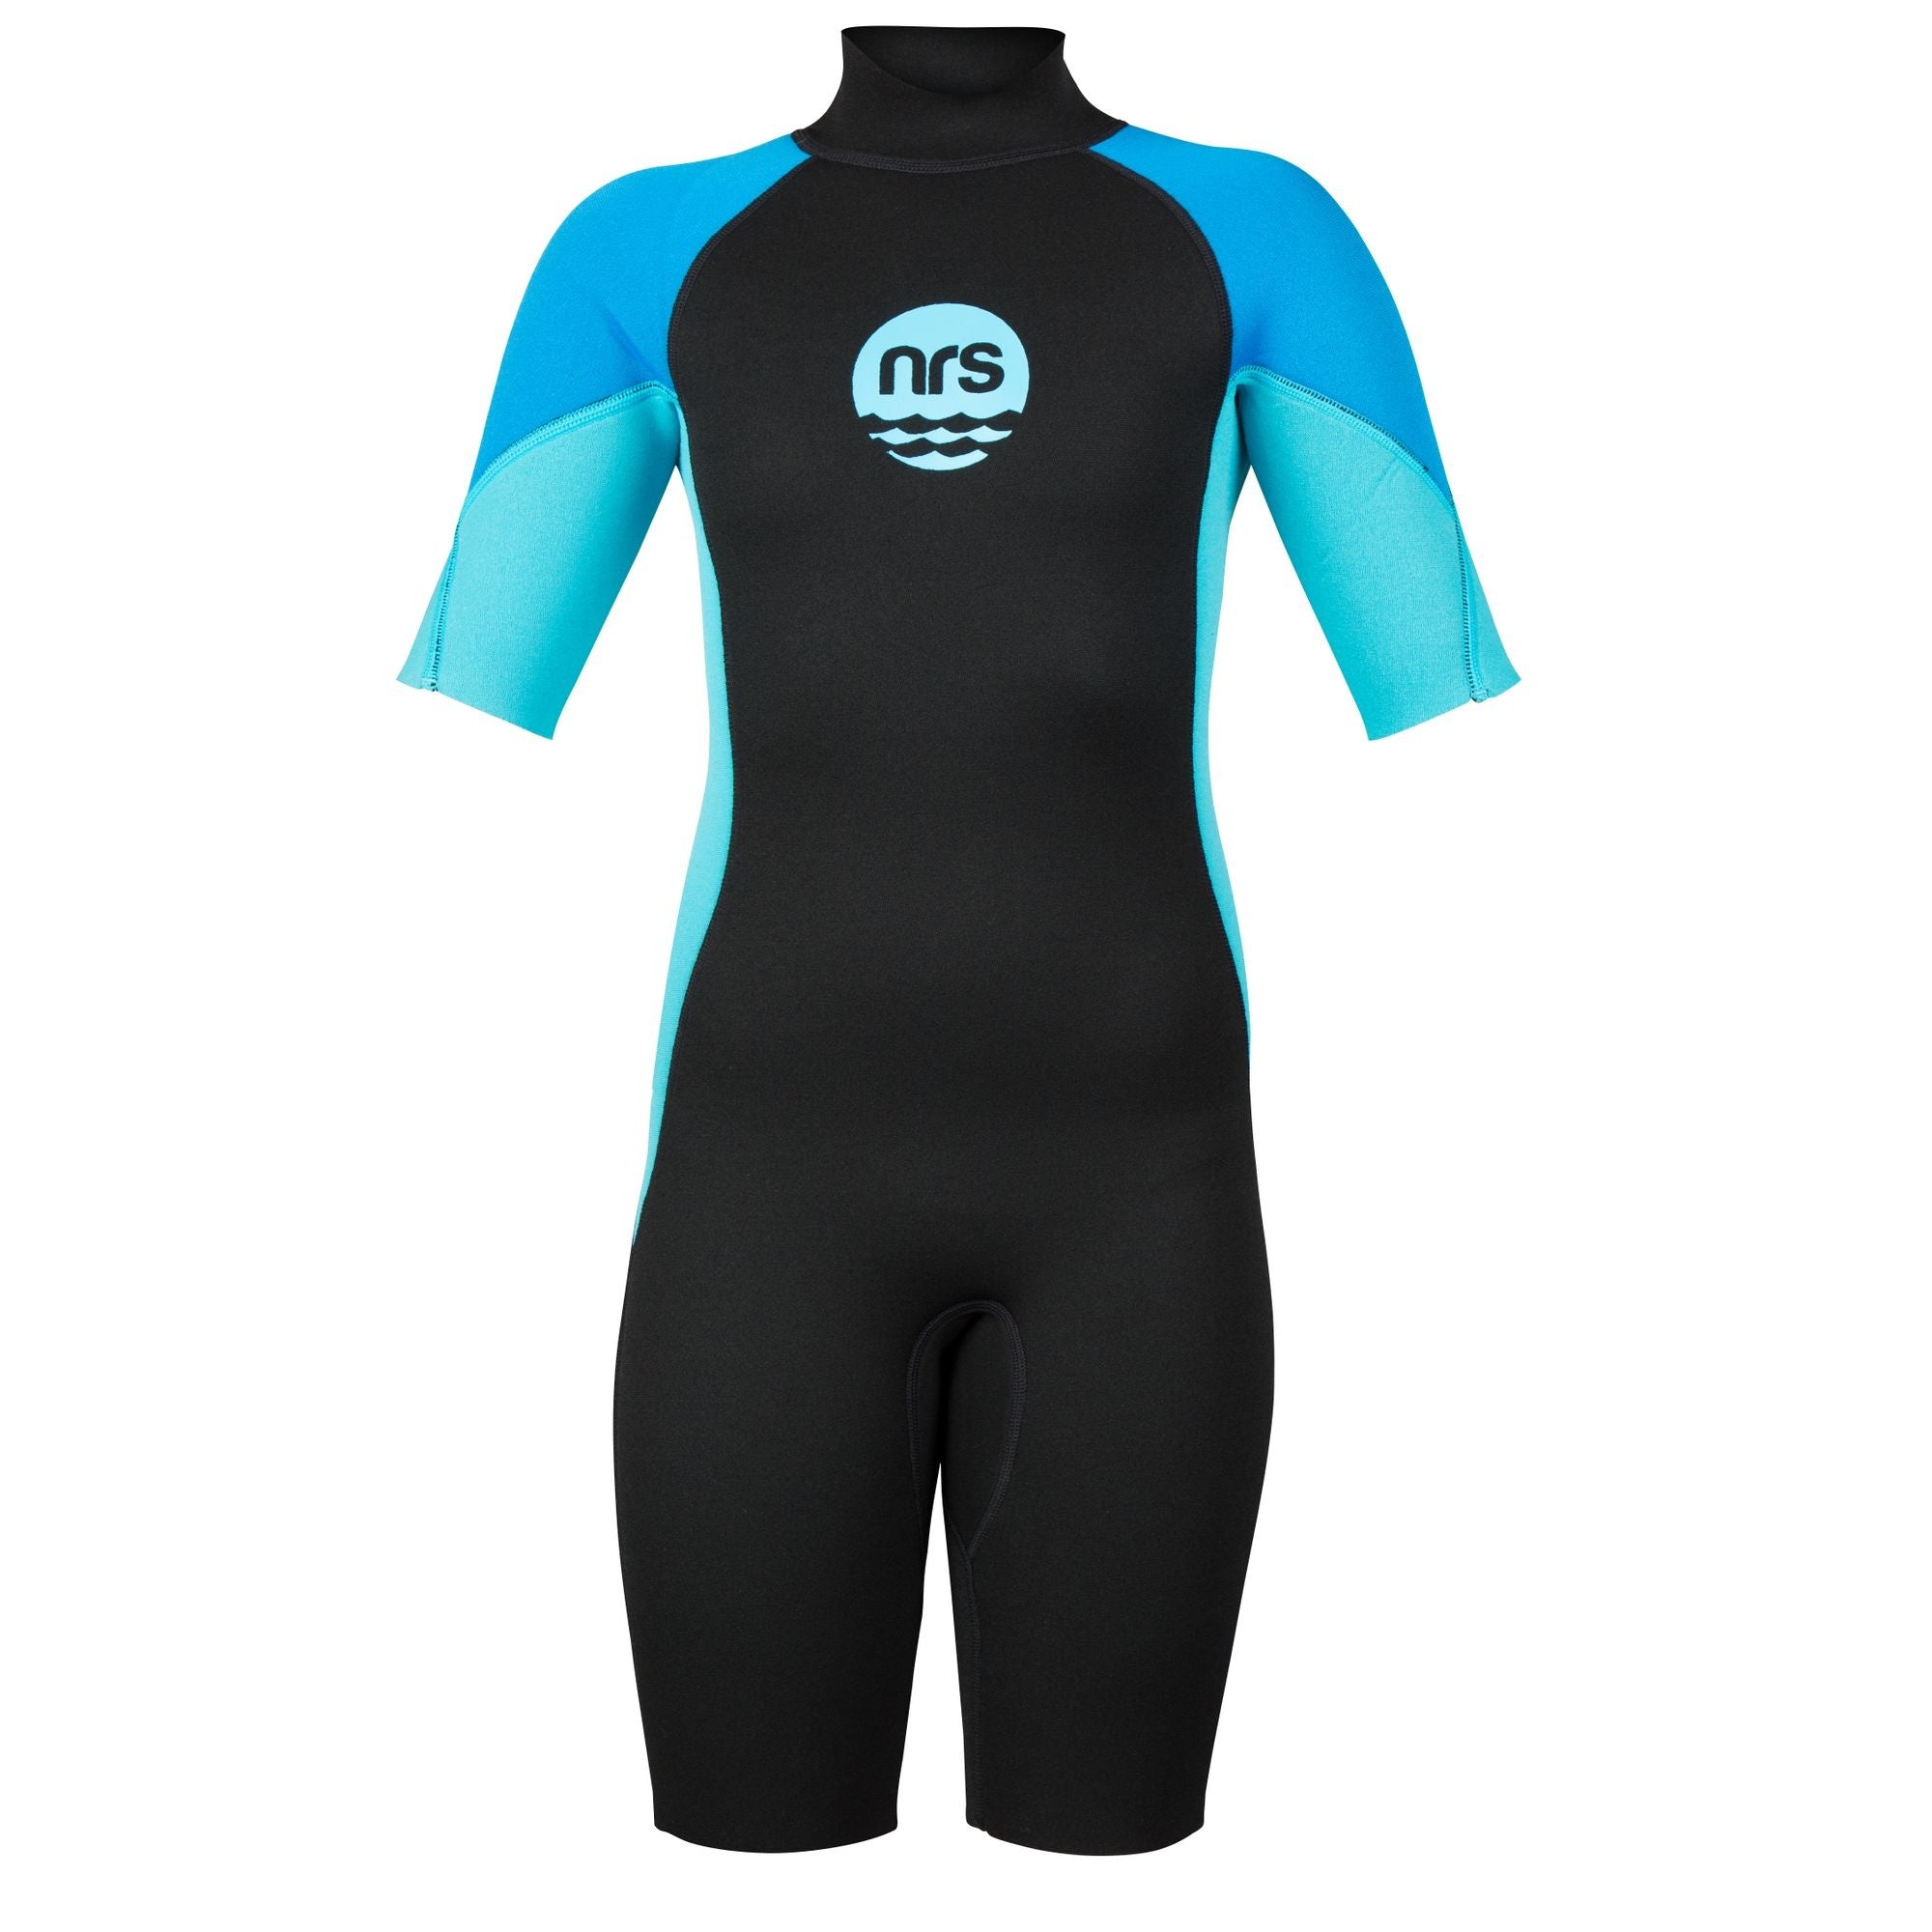 NRS - Kid's Shorty Wetsuit